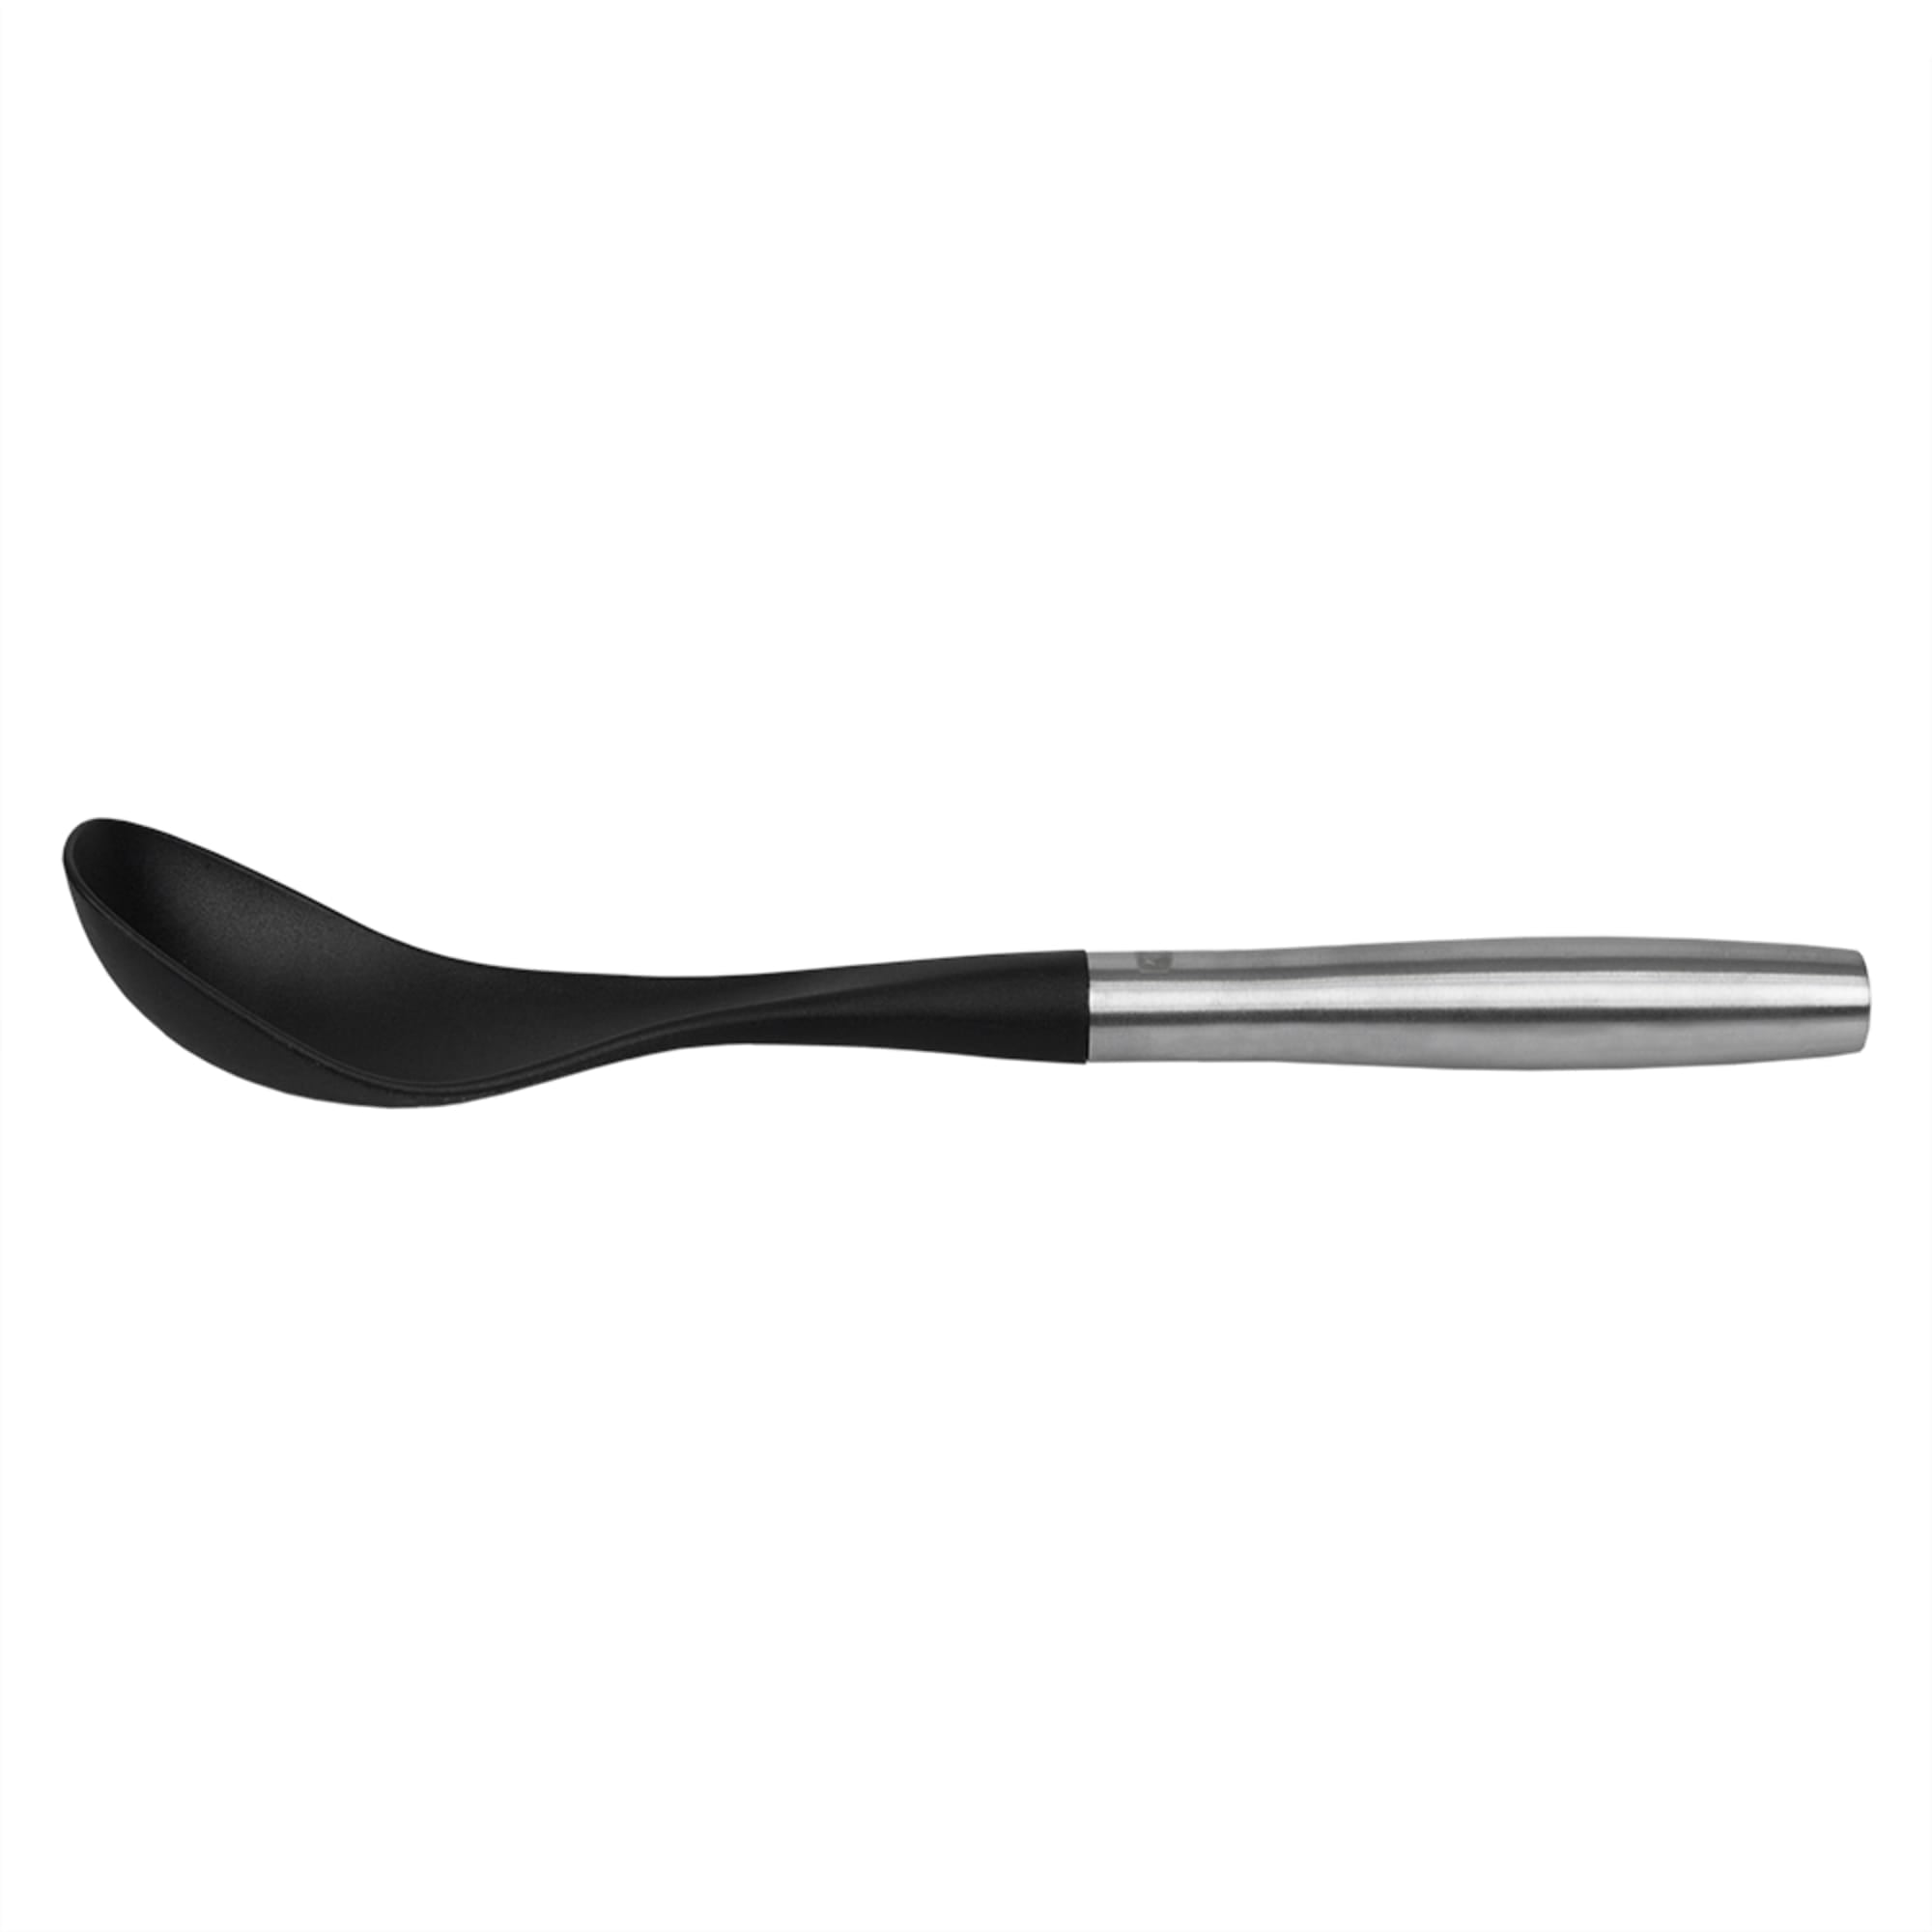 Home Basics Mesa Collection Scratch-Resistant Nylon Serving Spoon, Black $3.00 EACH, CASE PACK OF 24